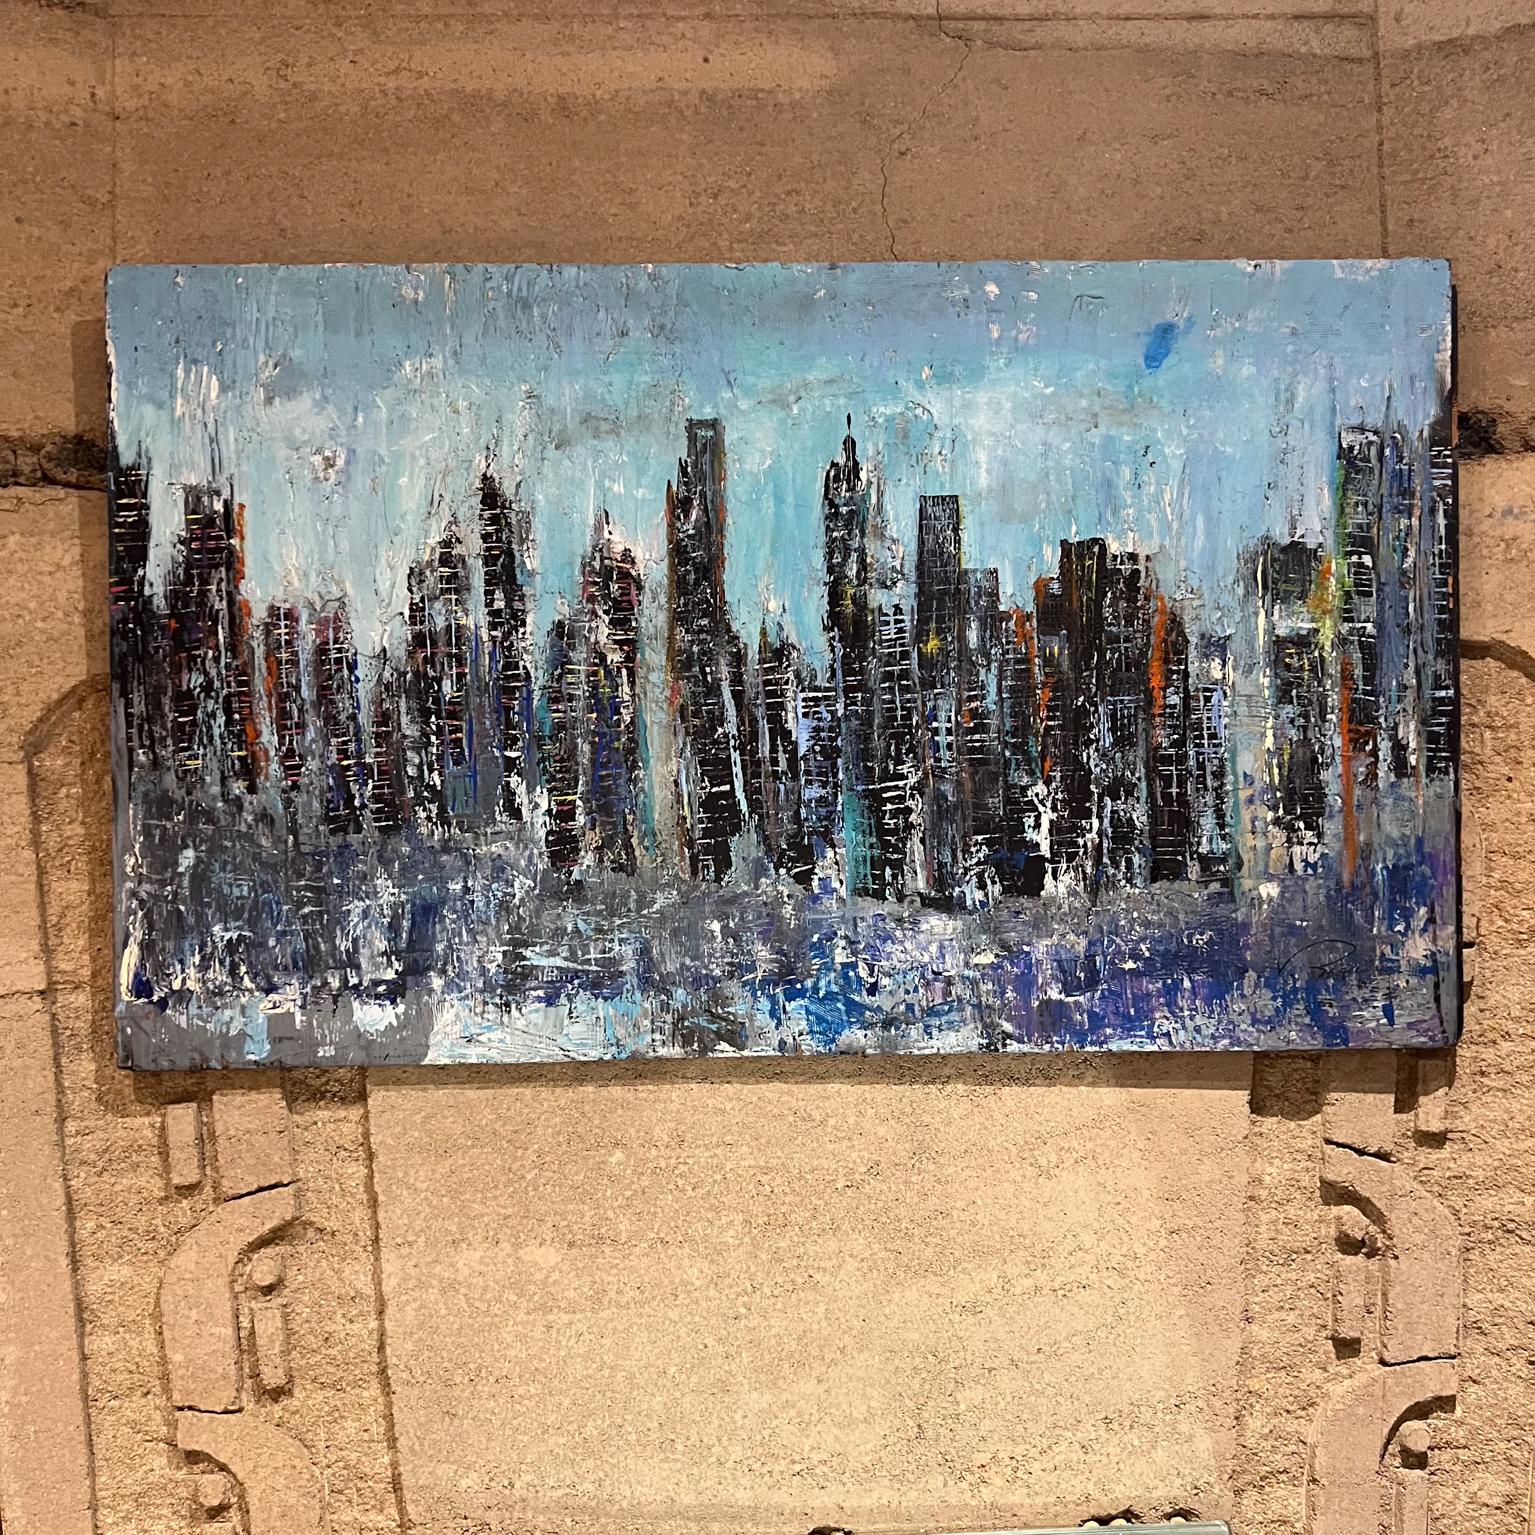 Abstract Blue City Landscape Modern Art Oil Painting on Wood
Signed unable to read
48.5 x 28.5 x .63 D
Preowned vintage unrestored condition.
Review images provided.